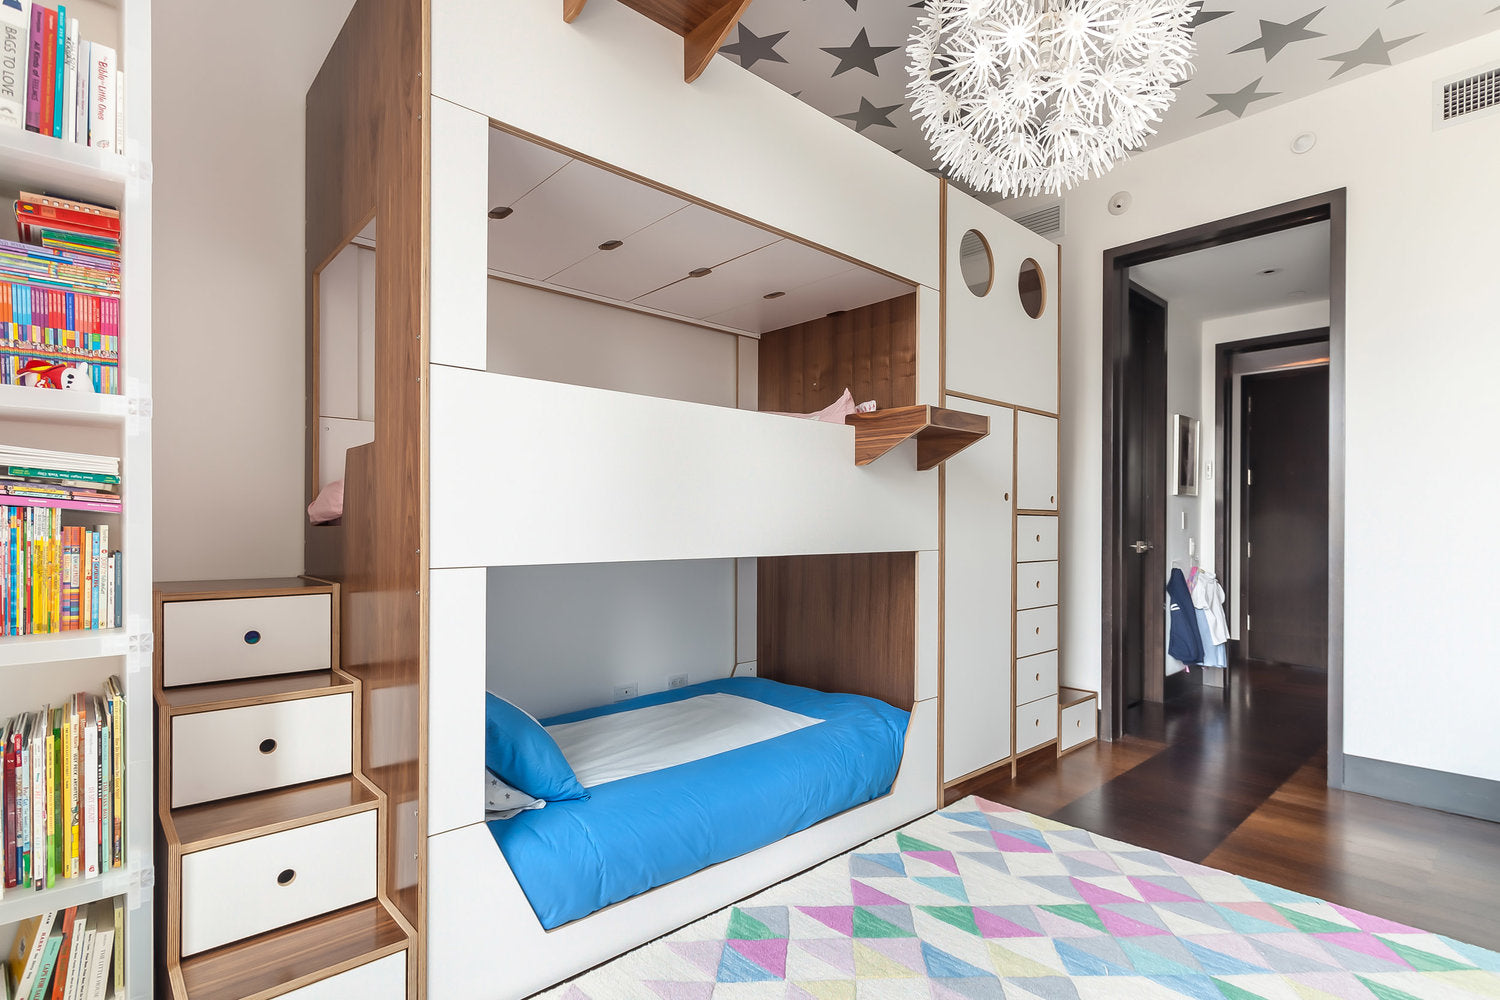 Triple bunk bed with star ceiling and colorful rug in a bright room.